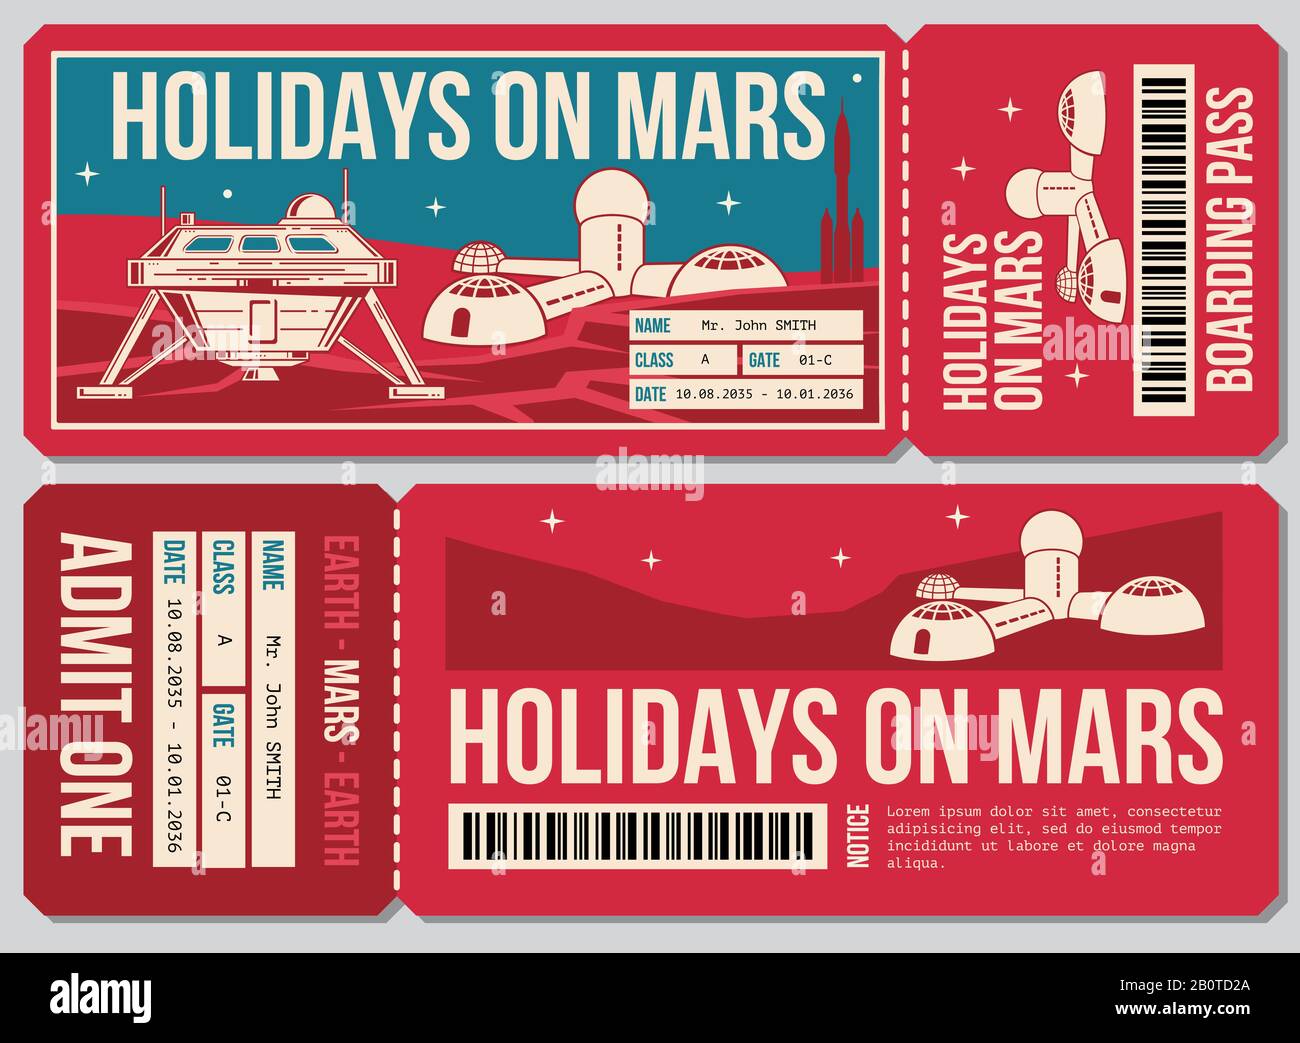 Travel voucher vector ticket. Holiday on Mars promo action. Ticket to mars planet, illustration of ticket voucher travel Stock Vector